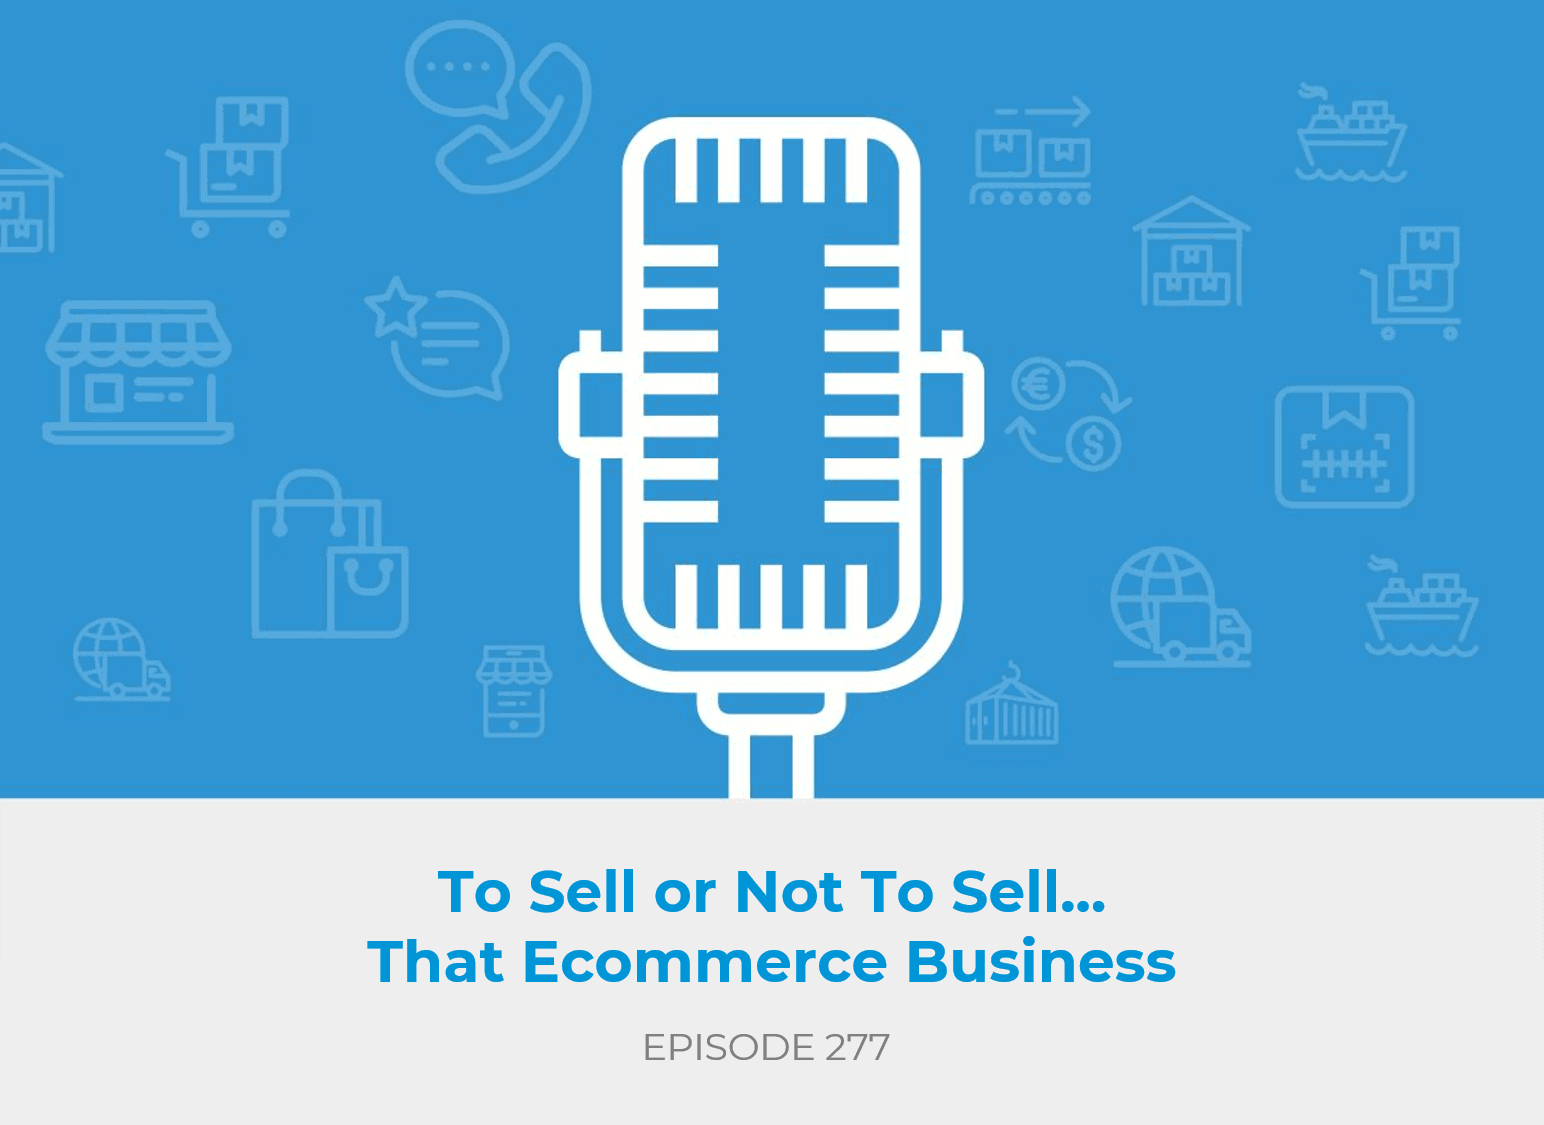 To Sell or Not To Sell...That Ecommerce Business